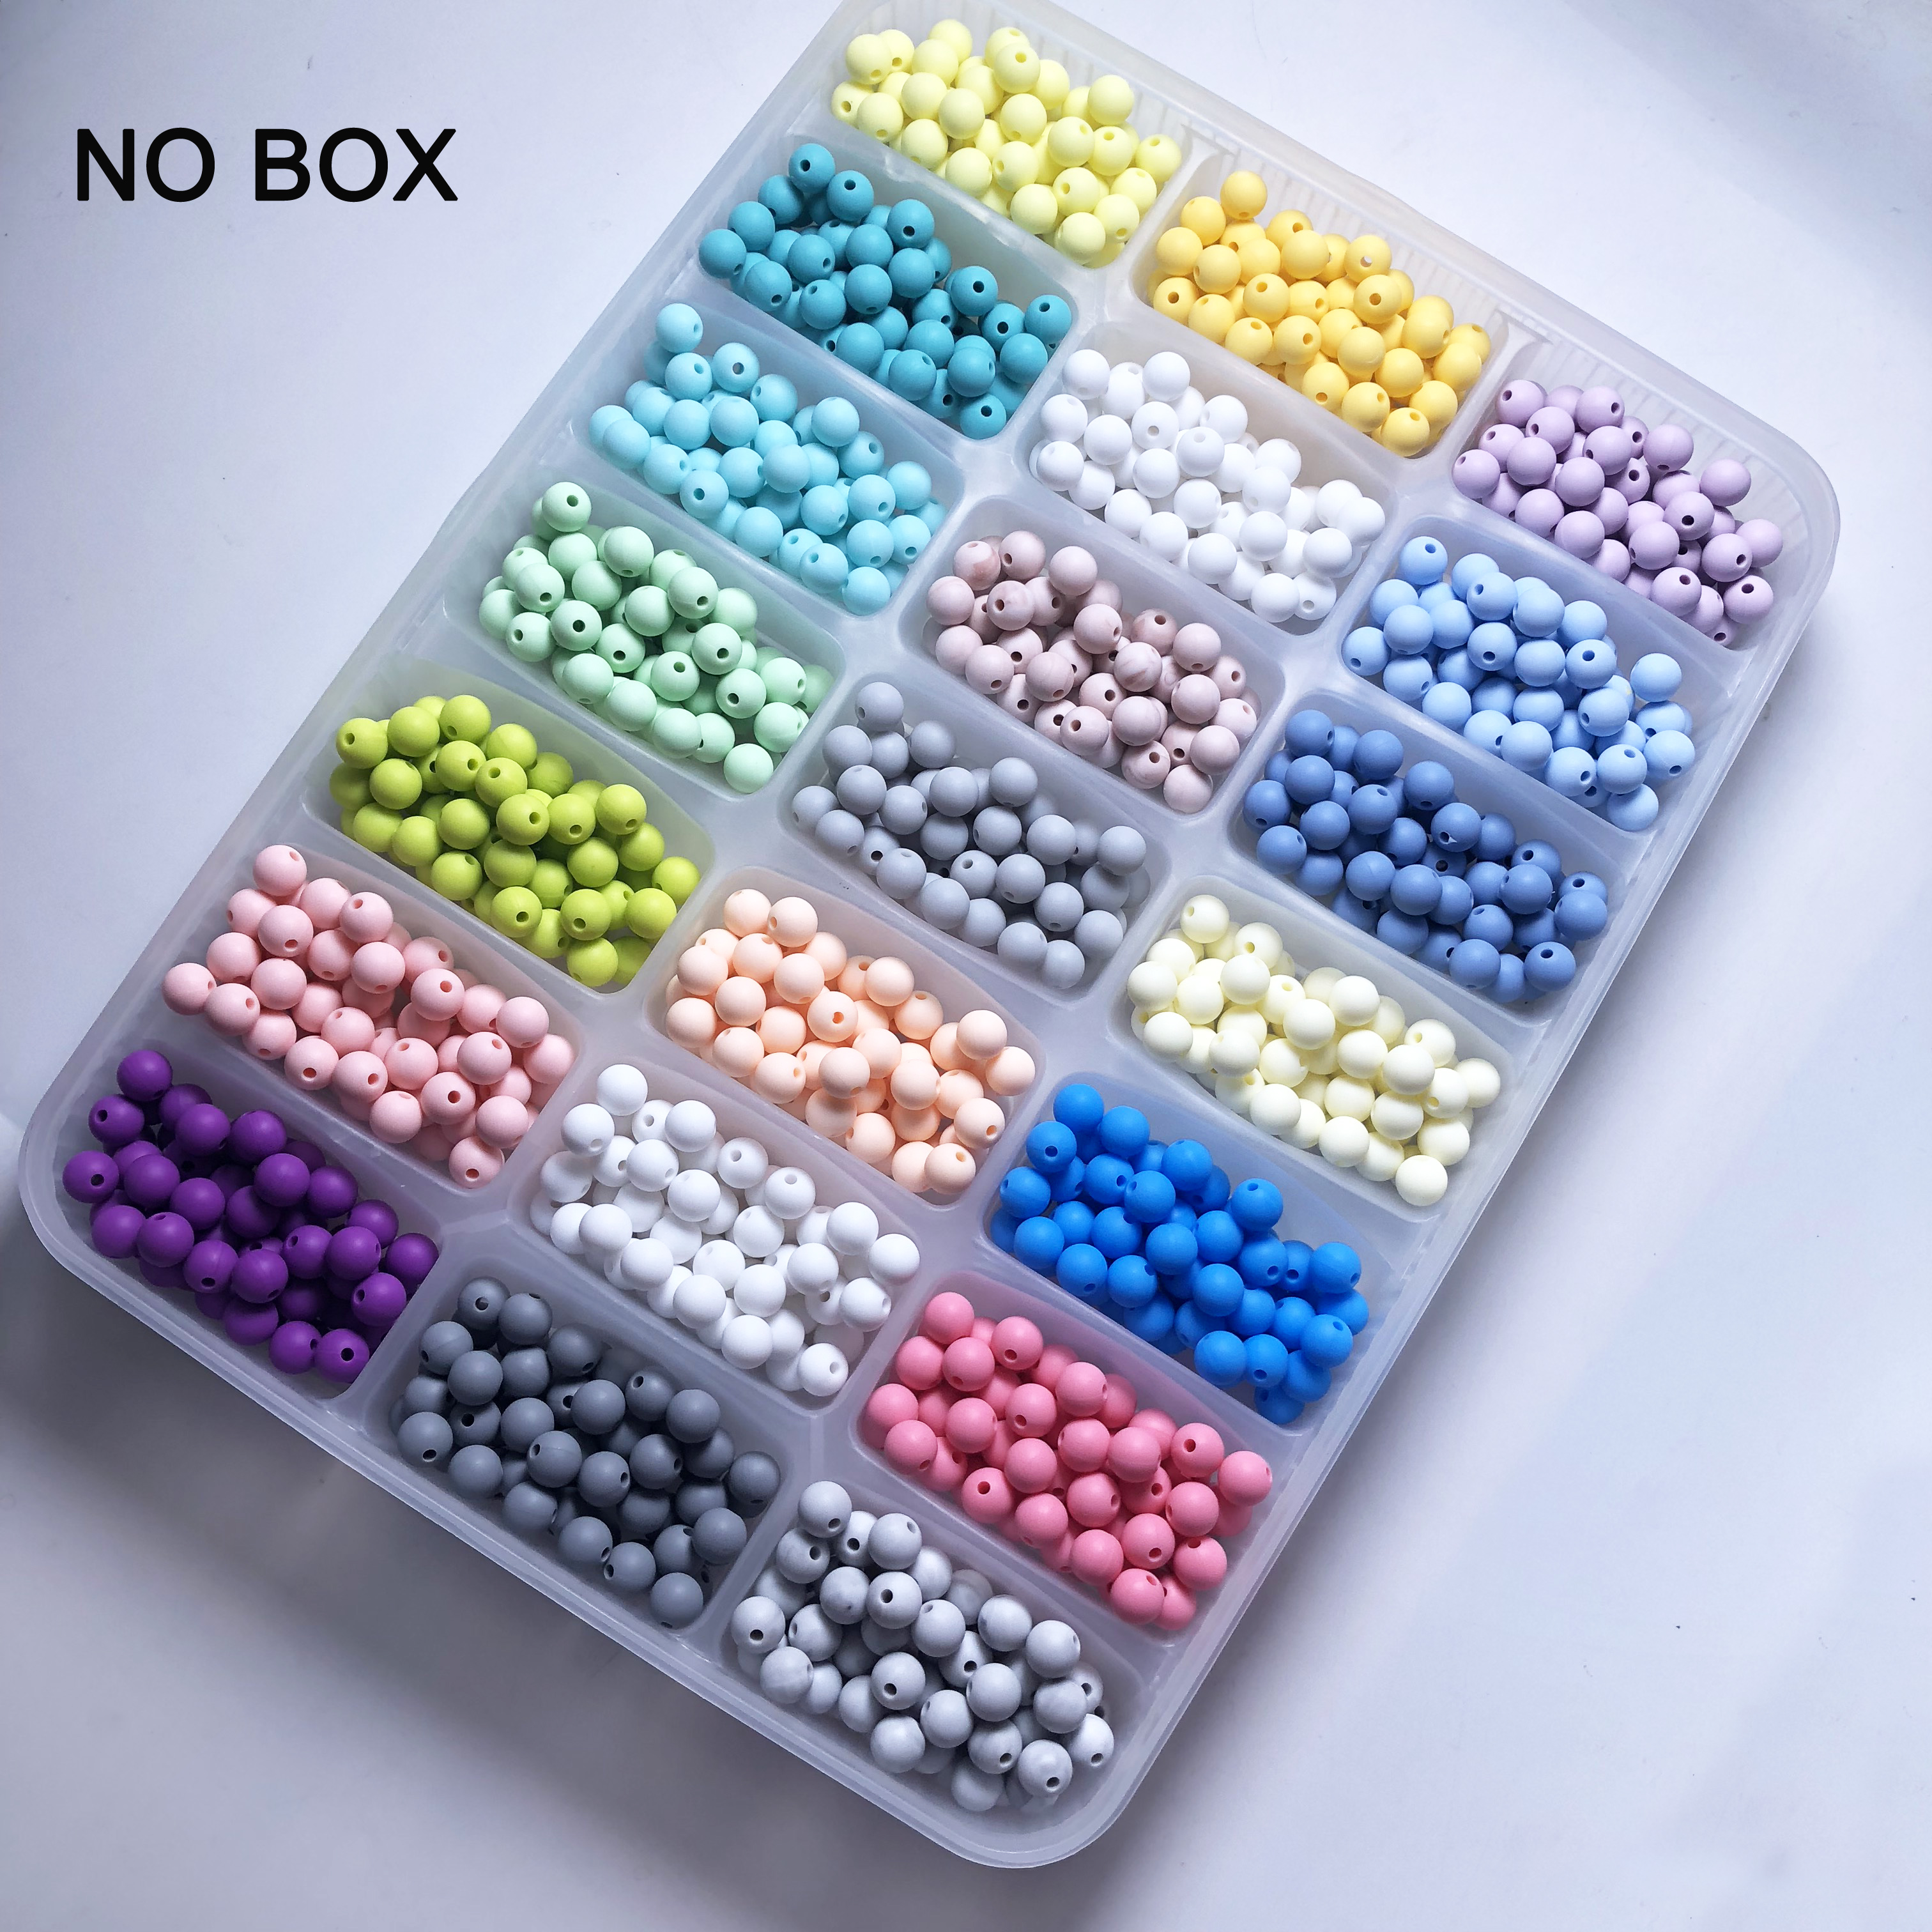 Candy Beads 100pc Silicone Baby Teething Teether Beads 10- 20mm Safe Food Grade Nursing Chewing Round Silicone Beads Necklace от DHgate WW